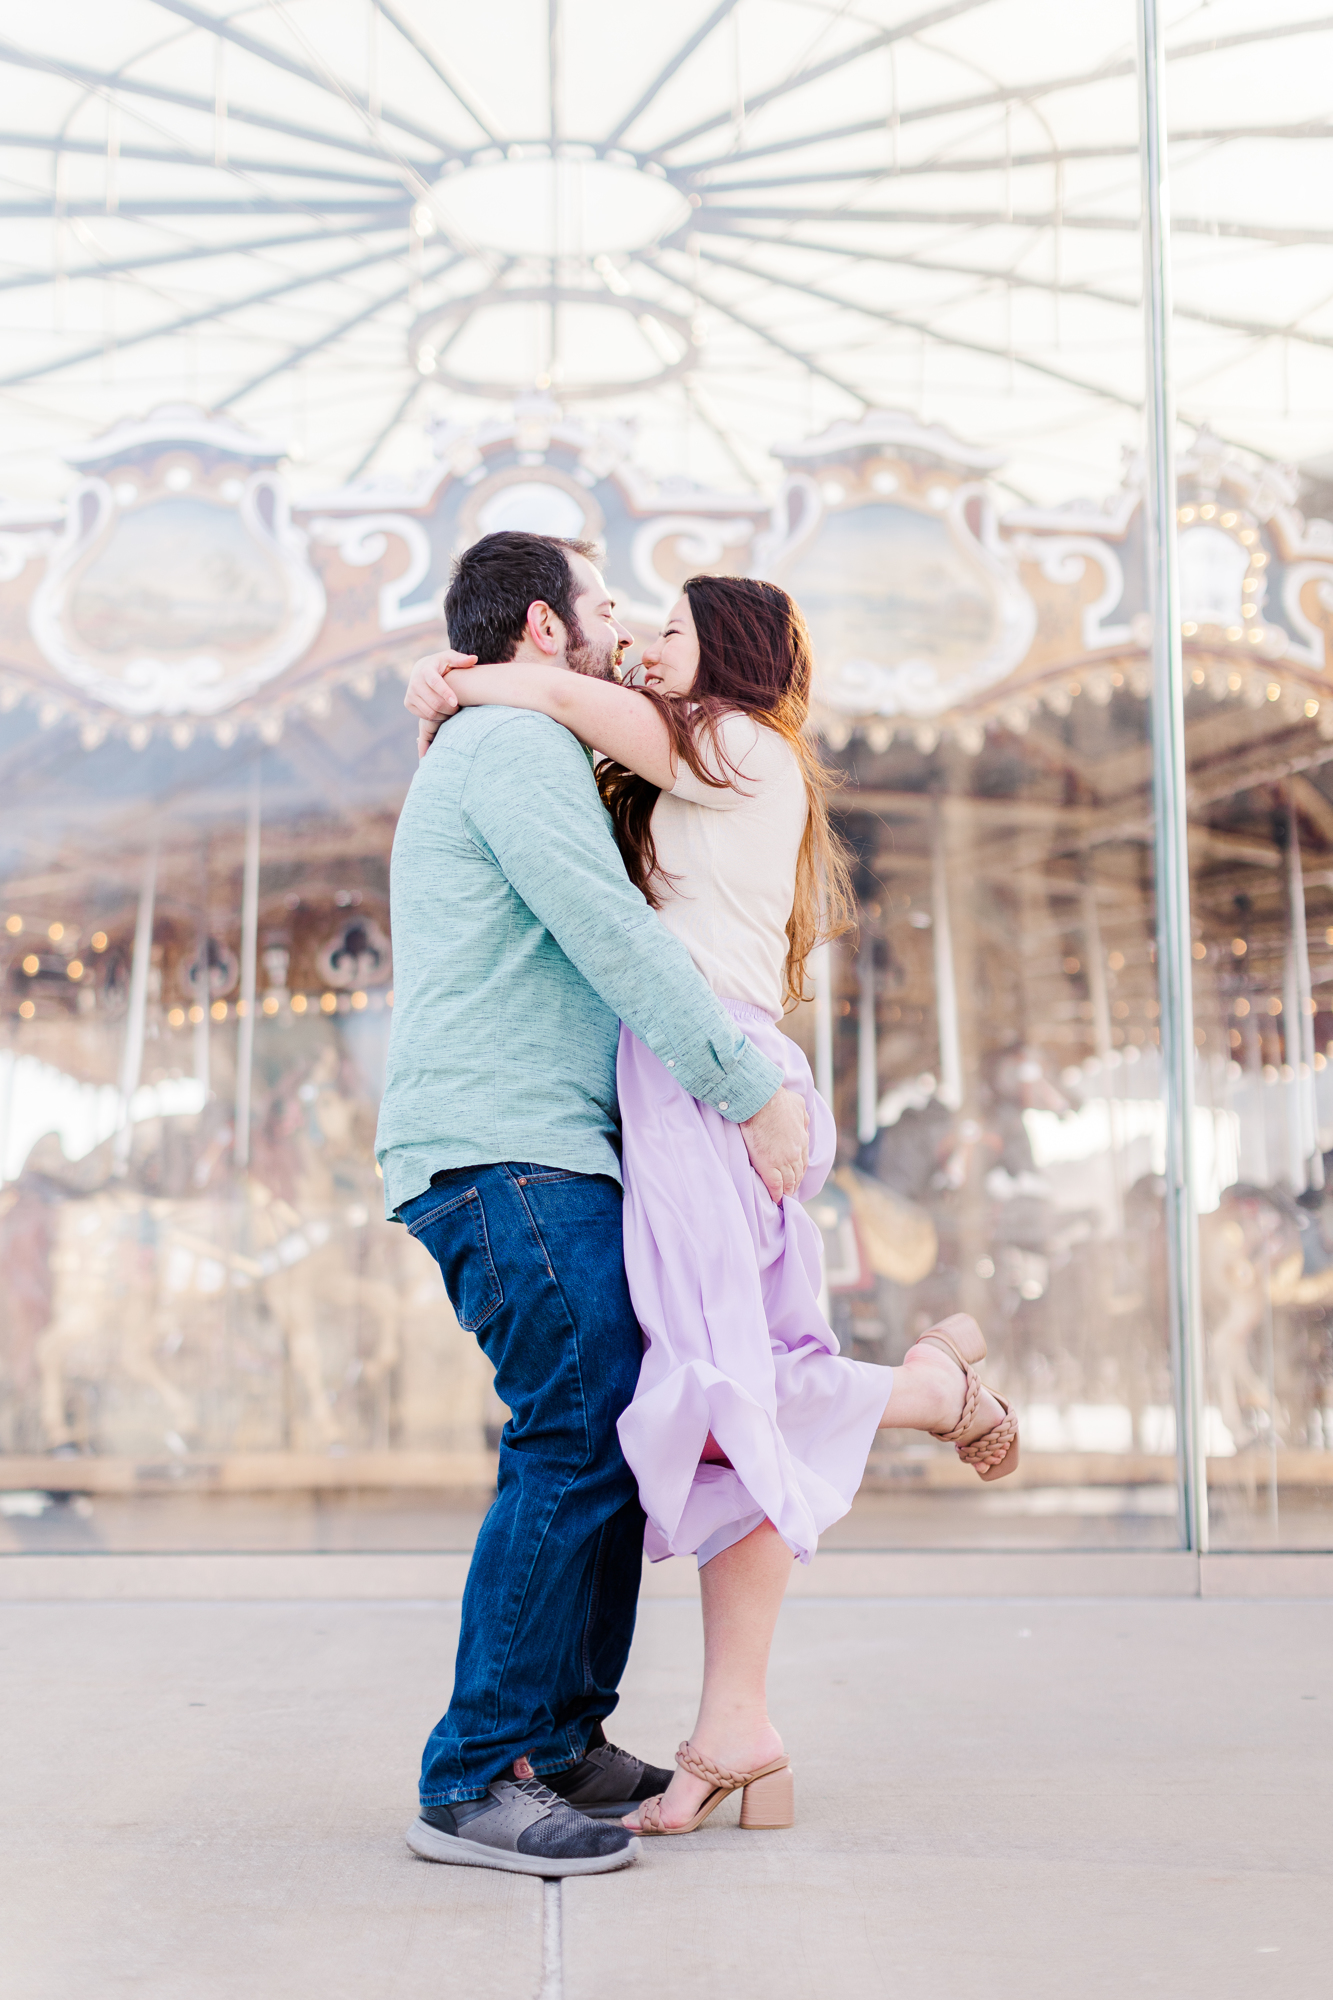 Magical Brooklyn Bridge Engagement Photography with Matching Outfits